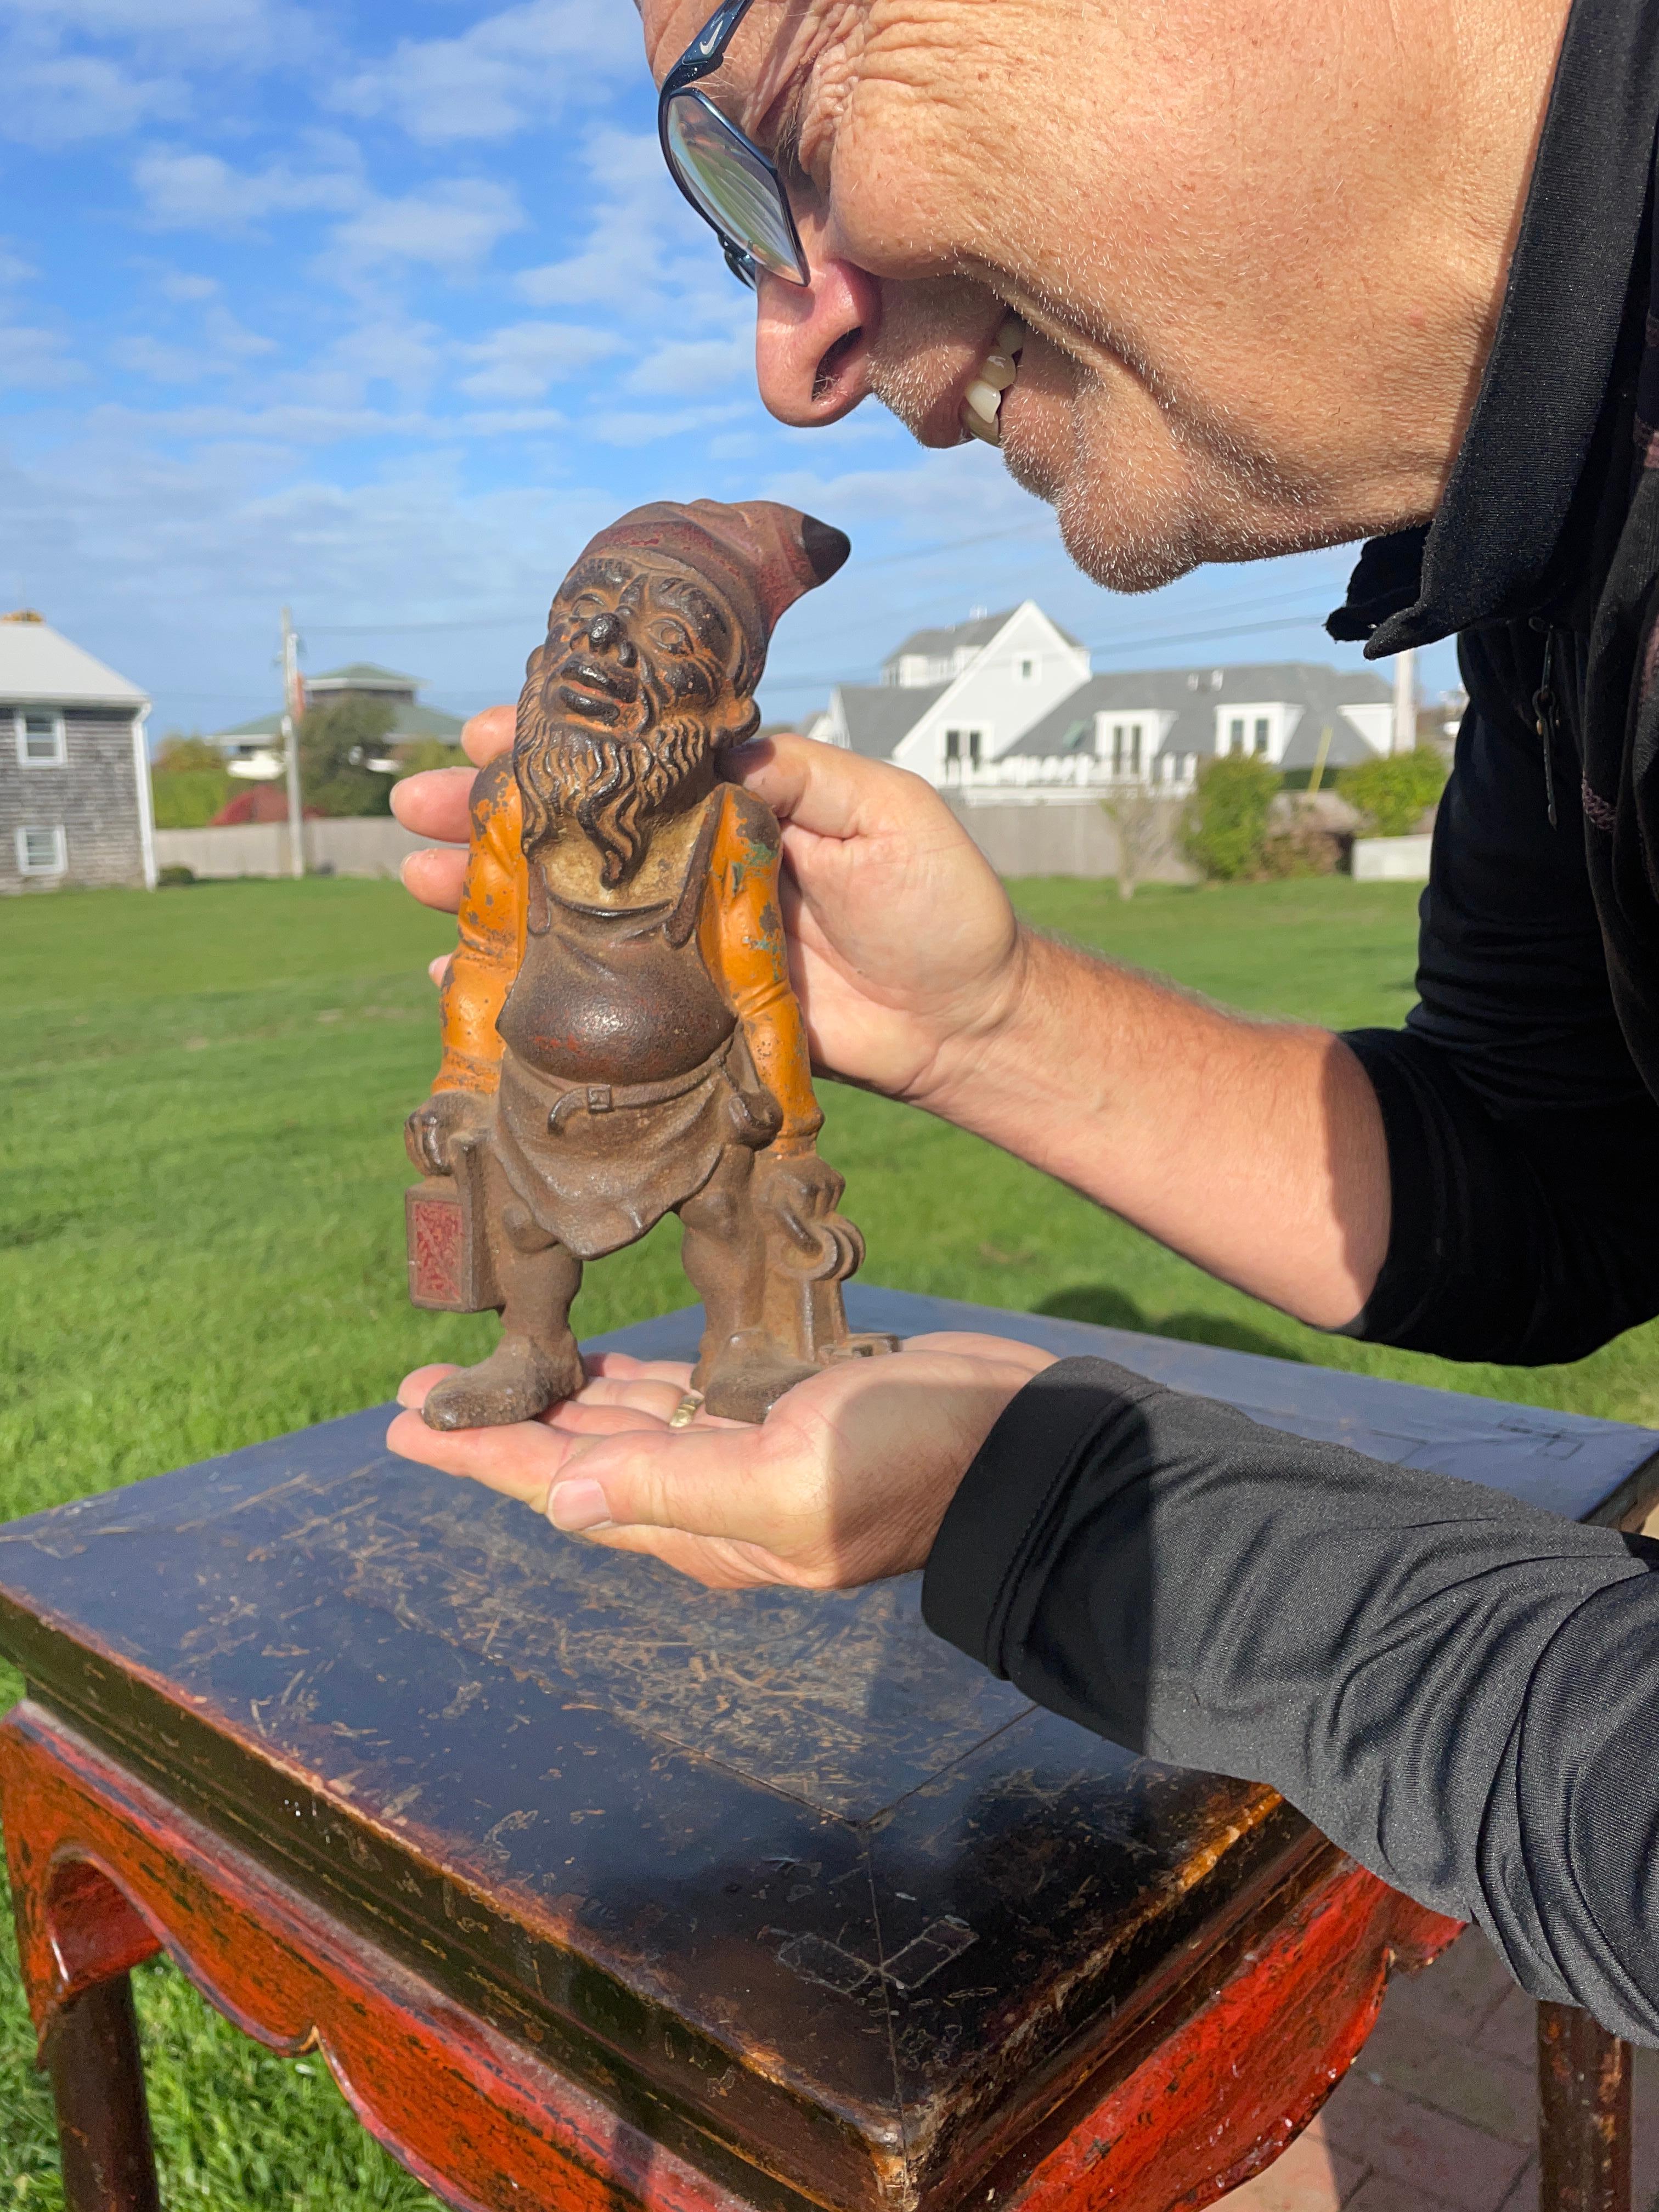 A good luck gnome in a rare old orange color for your special indoor or out door space.
Nostalgic opportunity.

America's friendly gnome- a Garden Gate Keeper With a Night Lantern Sculpture also known as 